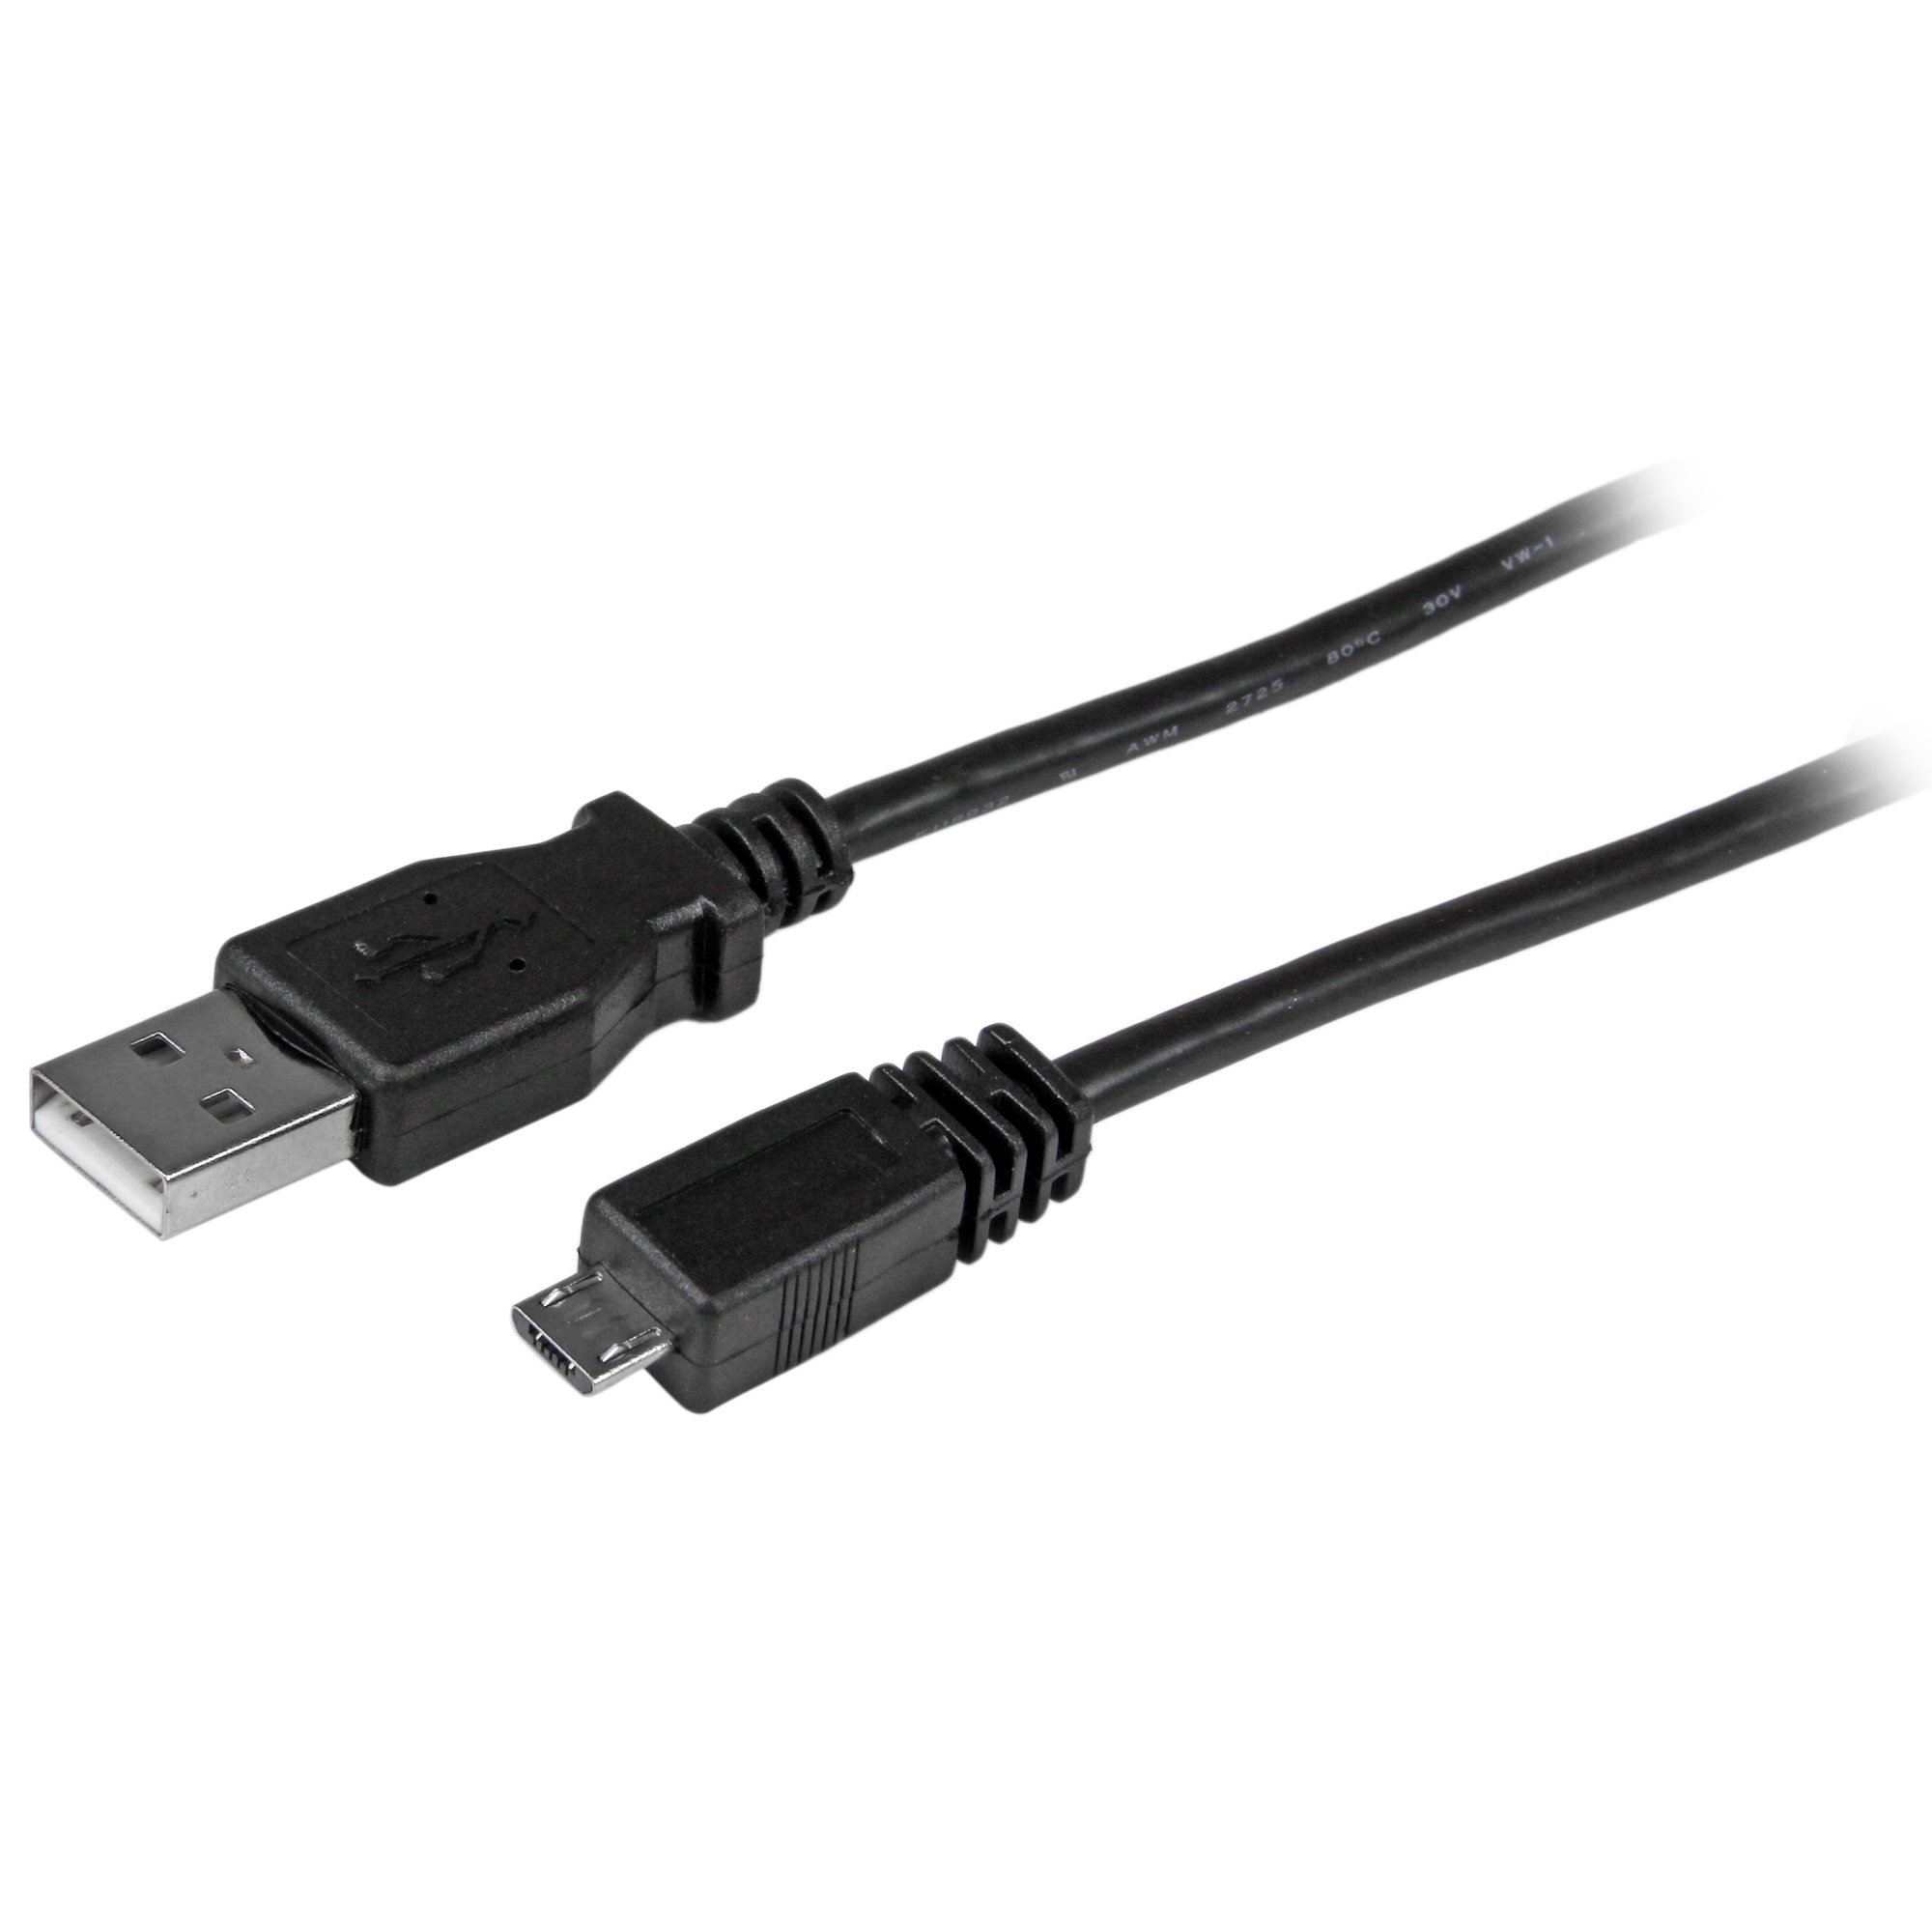 USB 2.0 Cable Type A male to Micro-B and Mini 5 Pin 1.8m 